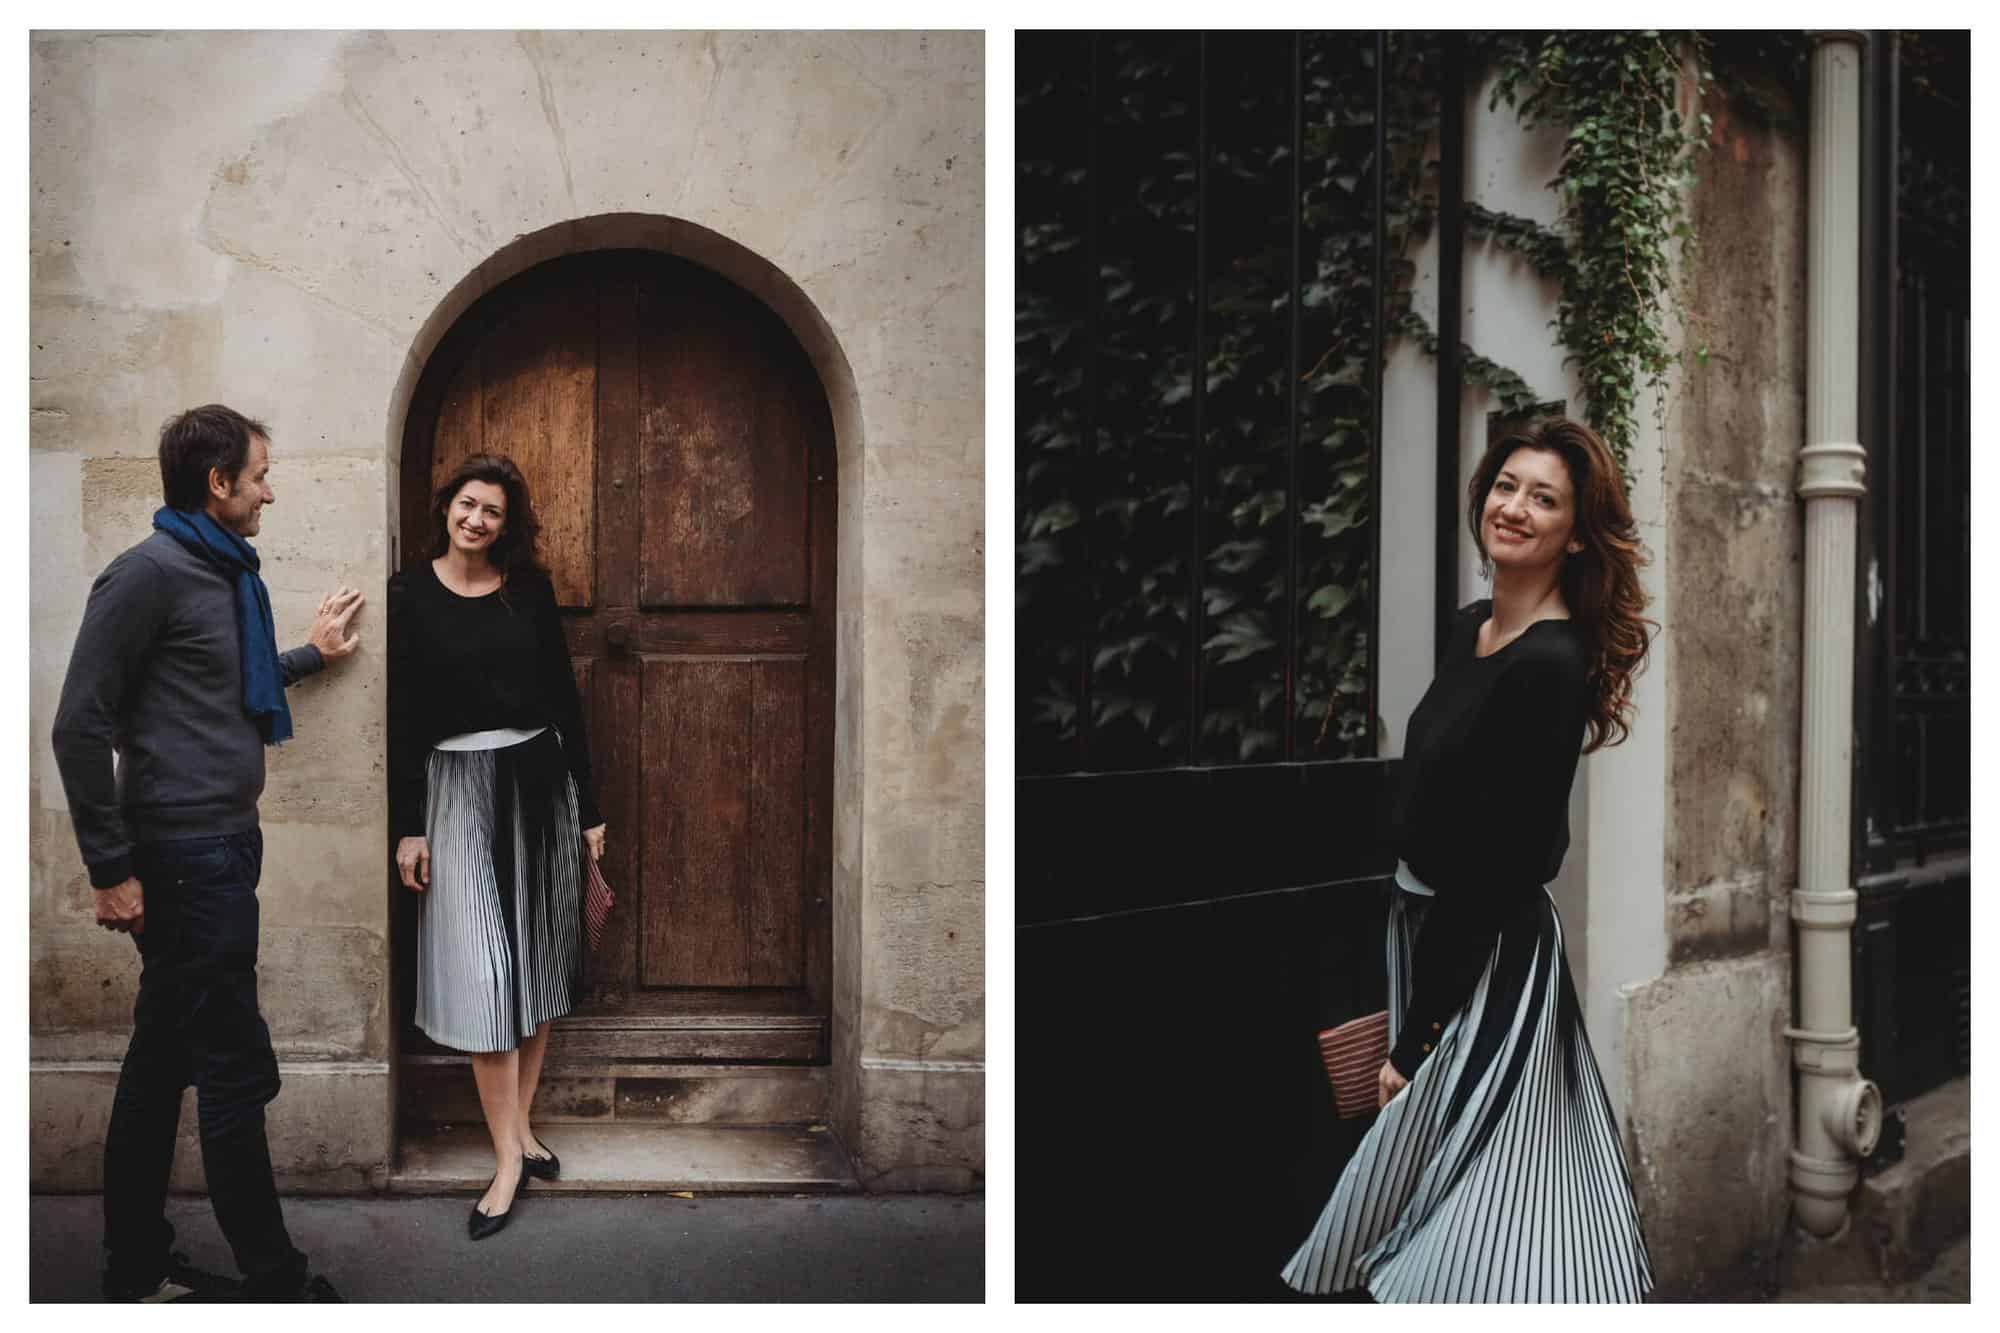 Left: A woman is standing in a small archway, looking directly at the camera and smiling. A man stands closely next to her, smiling at her instead of the camera. Right: A woman stands angled towards the camera, smiling. Her skirt flows as if she has just turned around to face the camera.